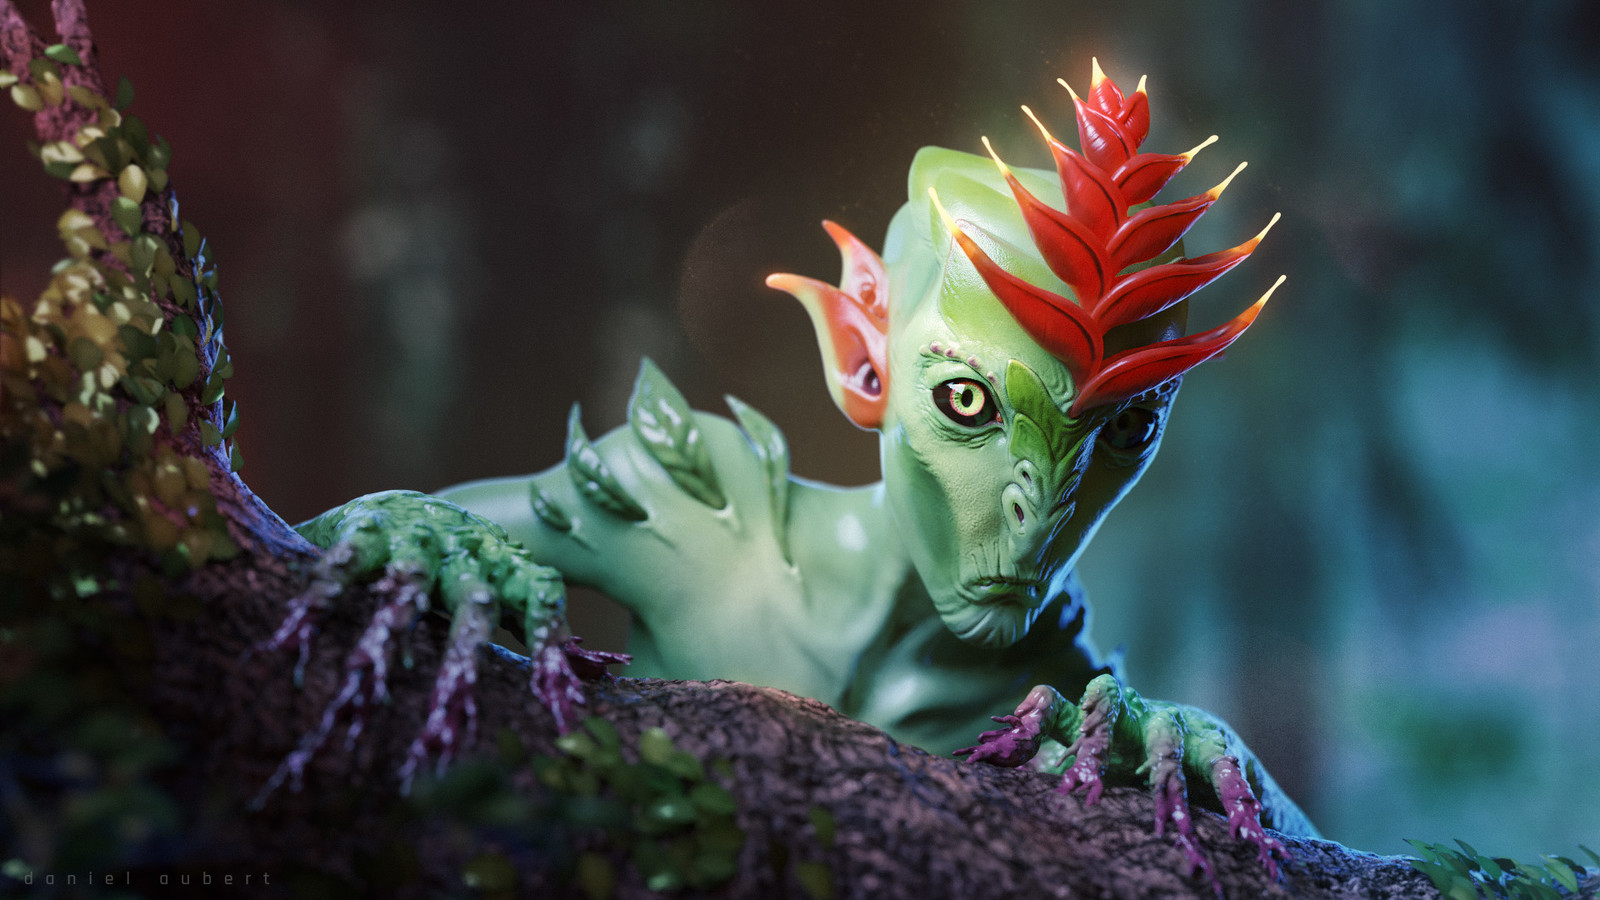 Forest Creature - 3rd place at Weekly CG Challenge #131